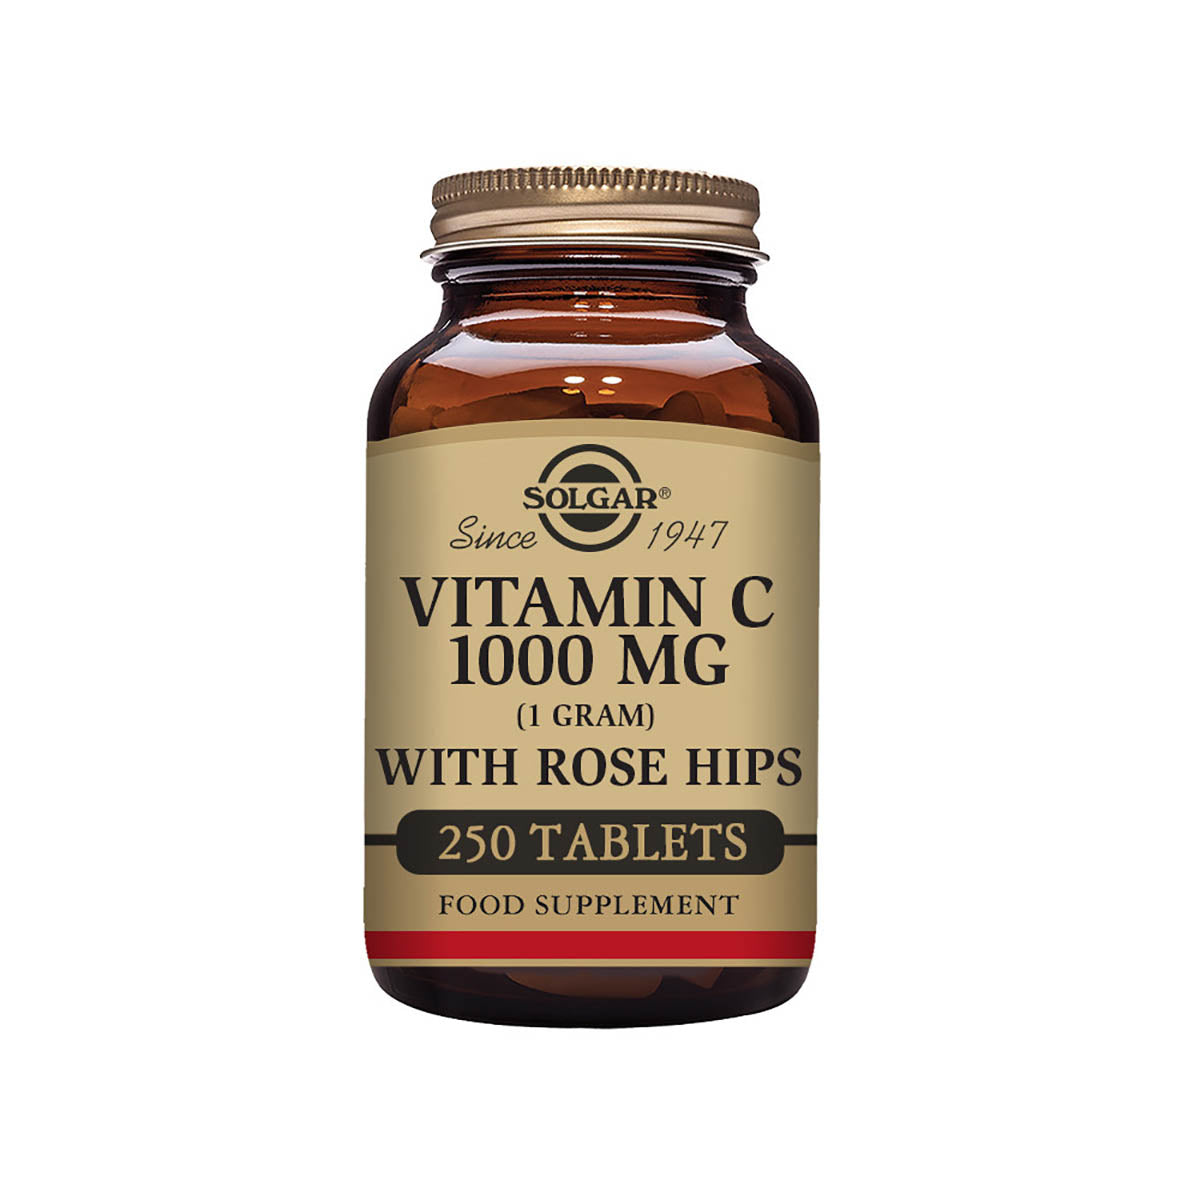 Solgar® Vitamin C 1000 mg with Rose Hips Tablets - Pack of 250